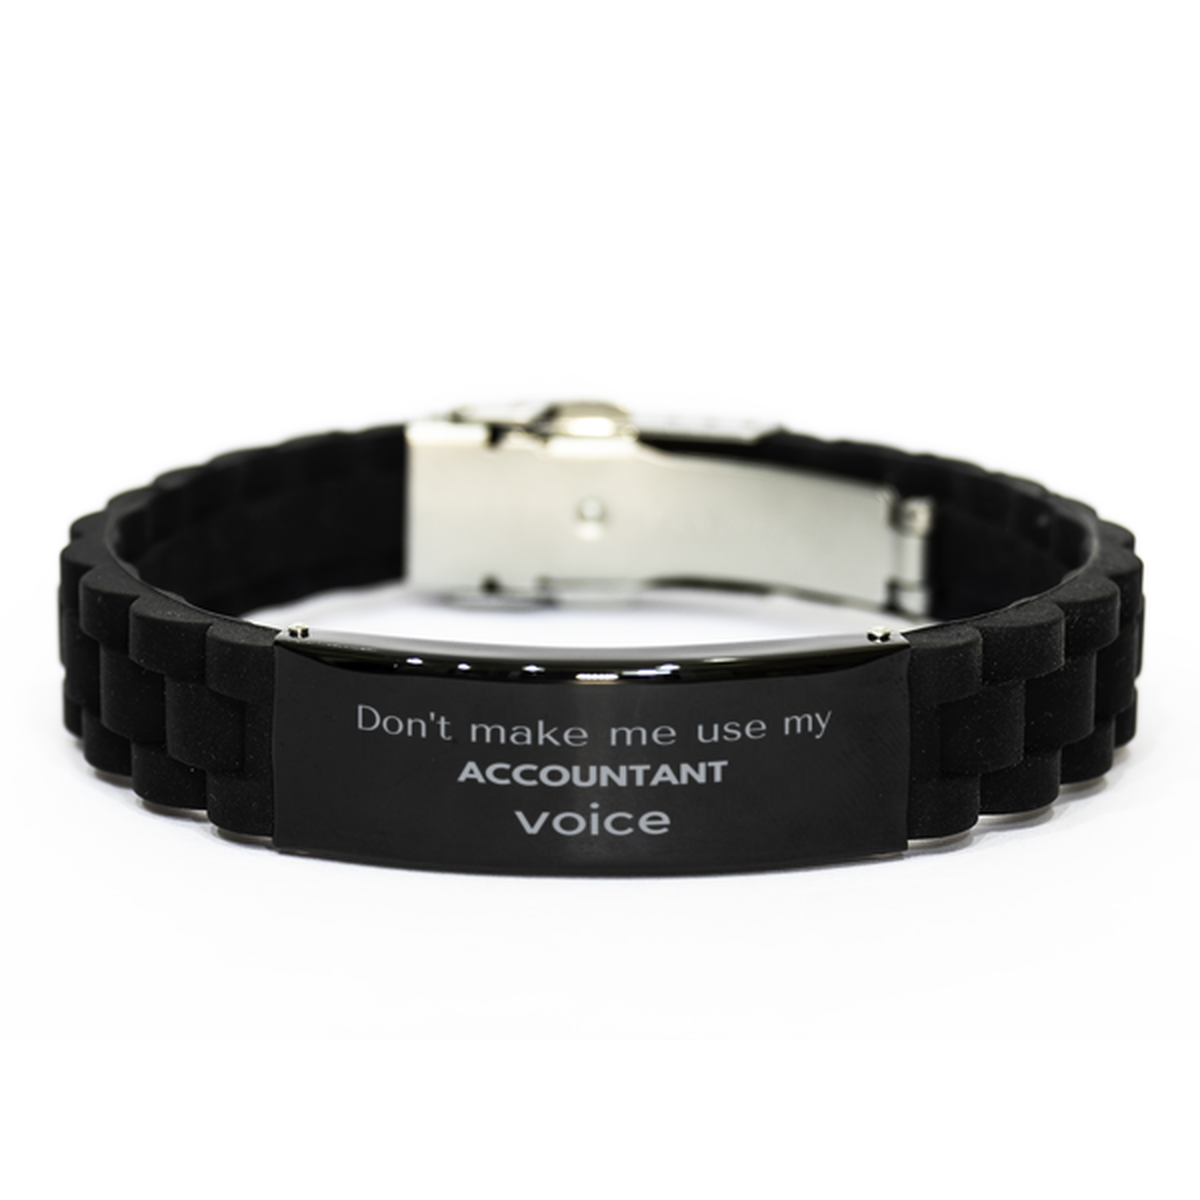 Don't make me use my Accountant voice, Sarcasm Accountant Gifts, Christmas Accountant Black Glidelock Clasp Bracelet Birthday Unique Gifts For Accountant Coworkers, Men, Women, Colleague, Friends